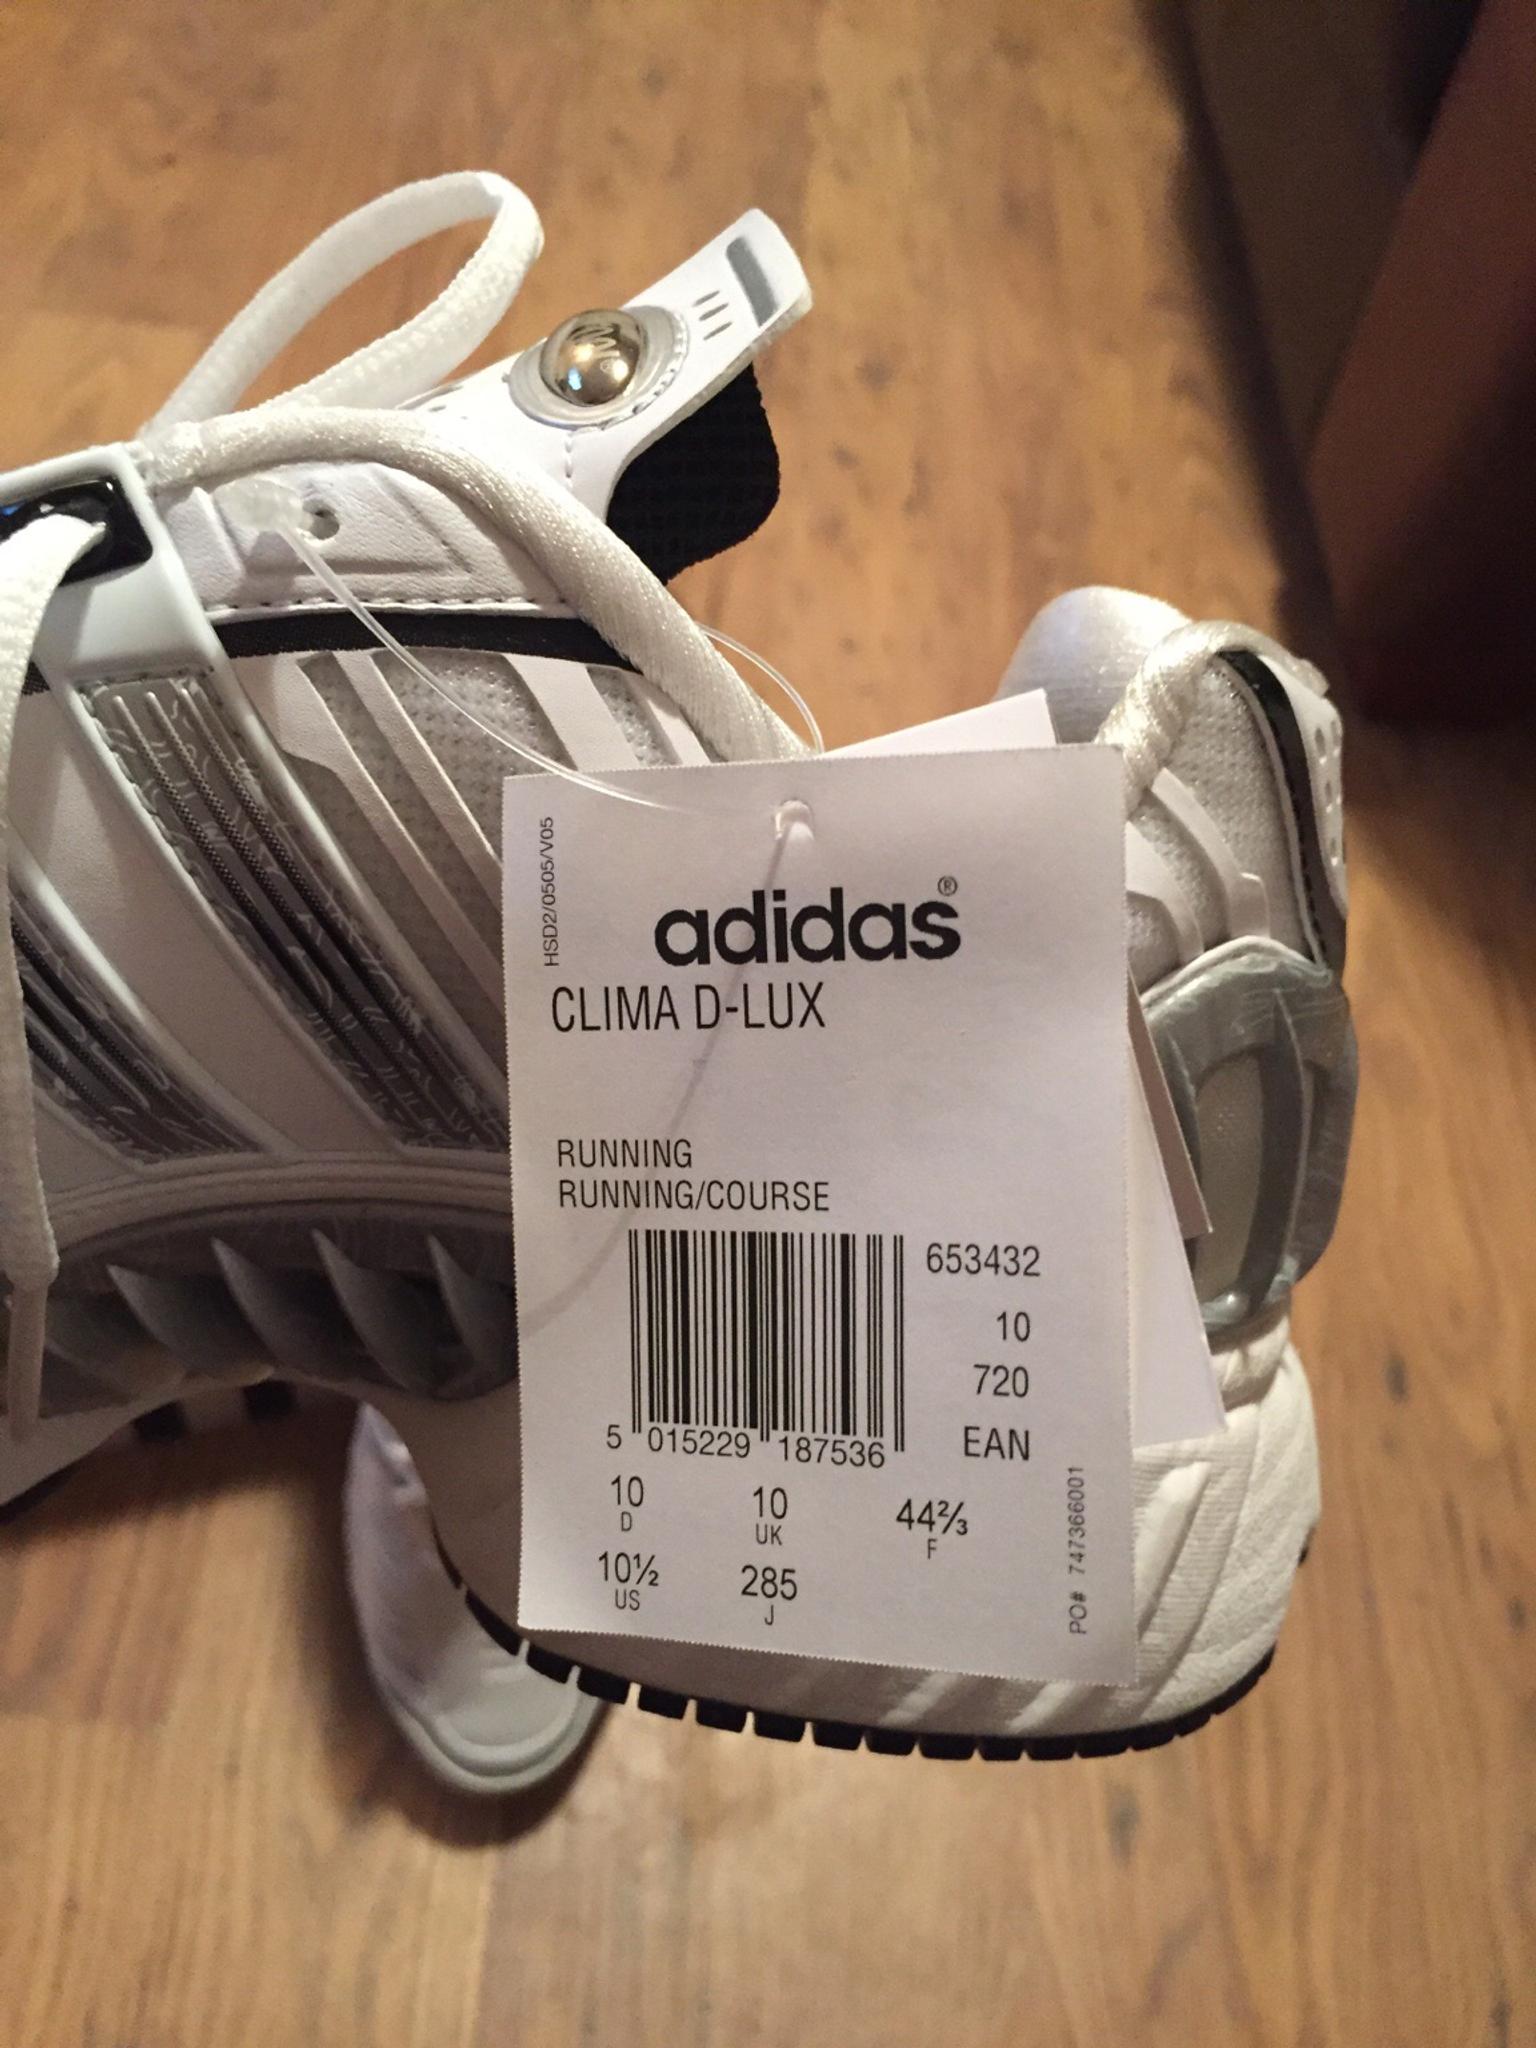 adidas climacool d lux